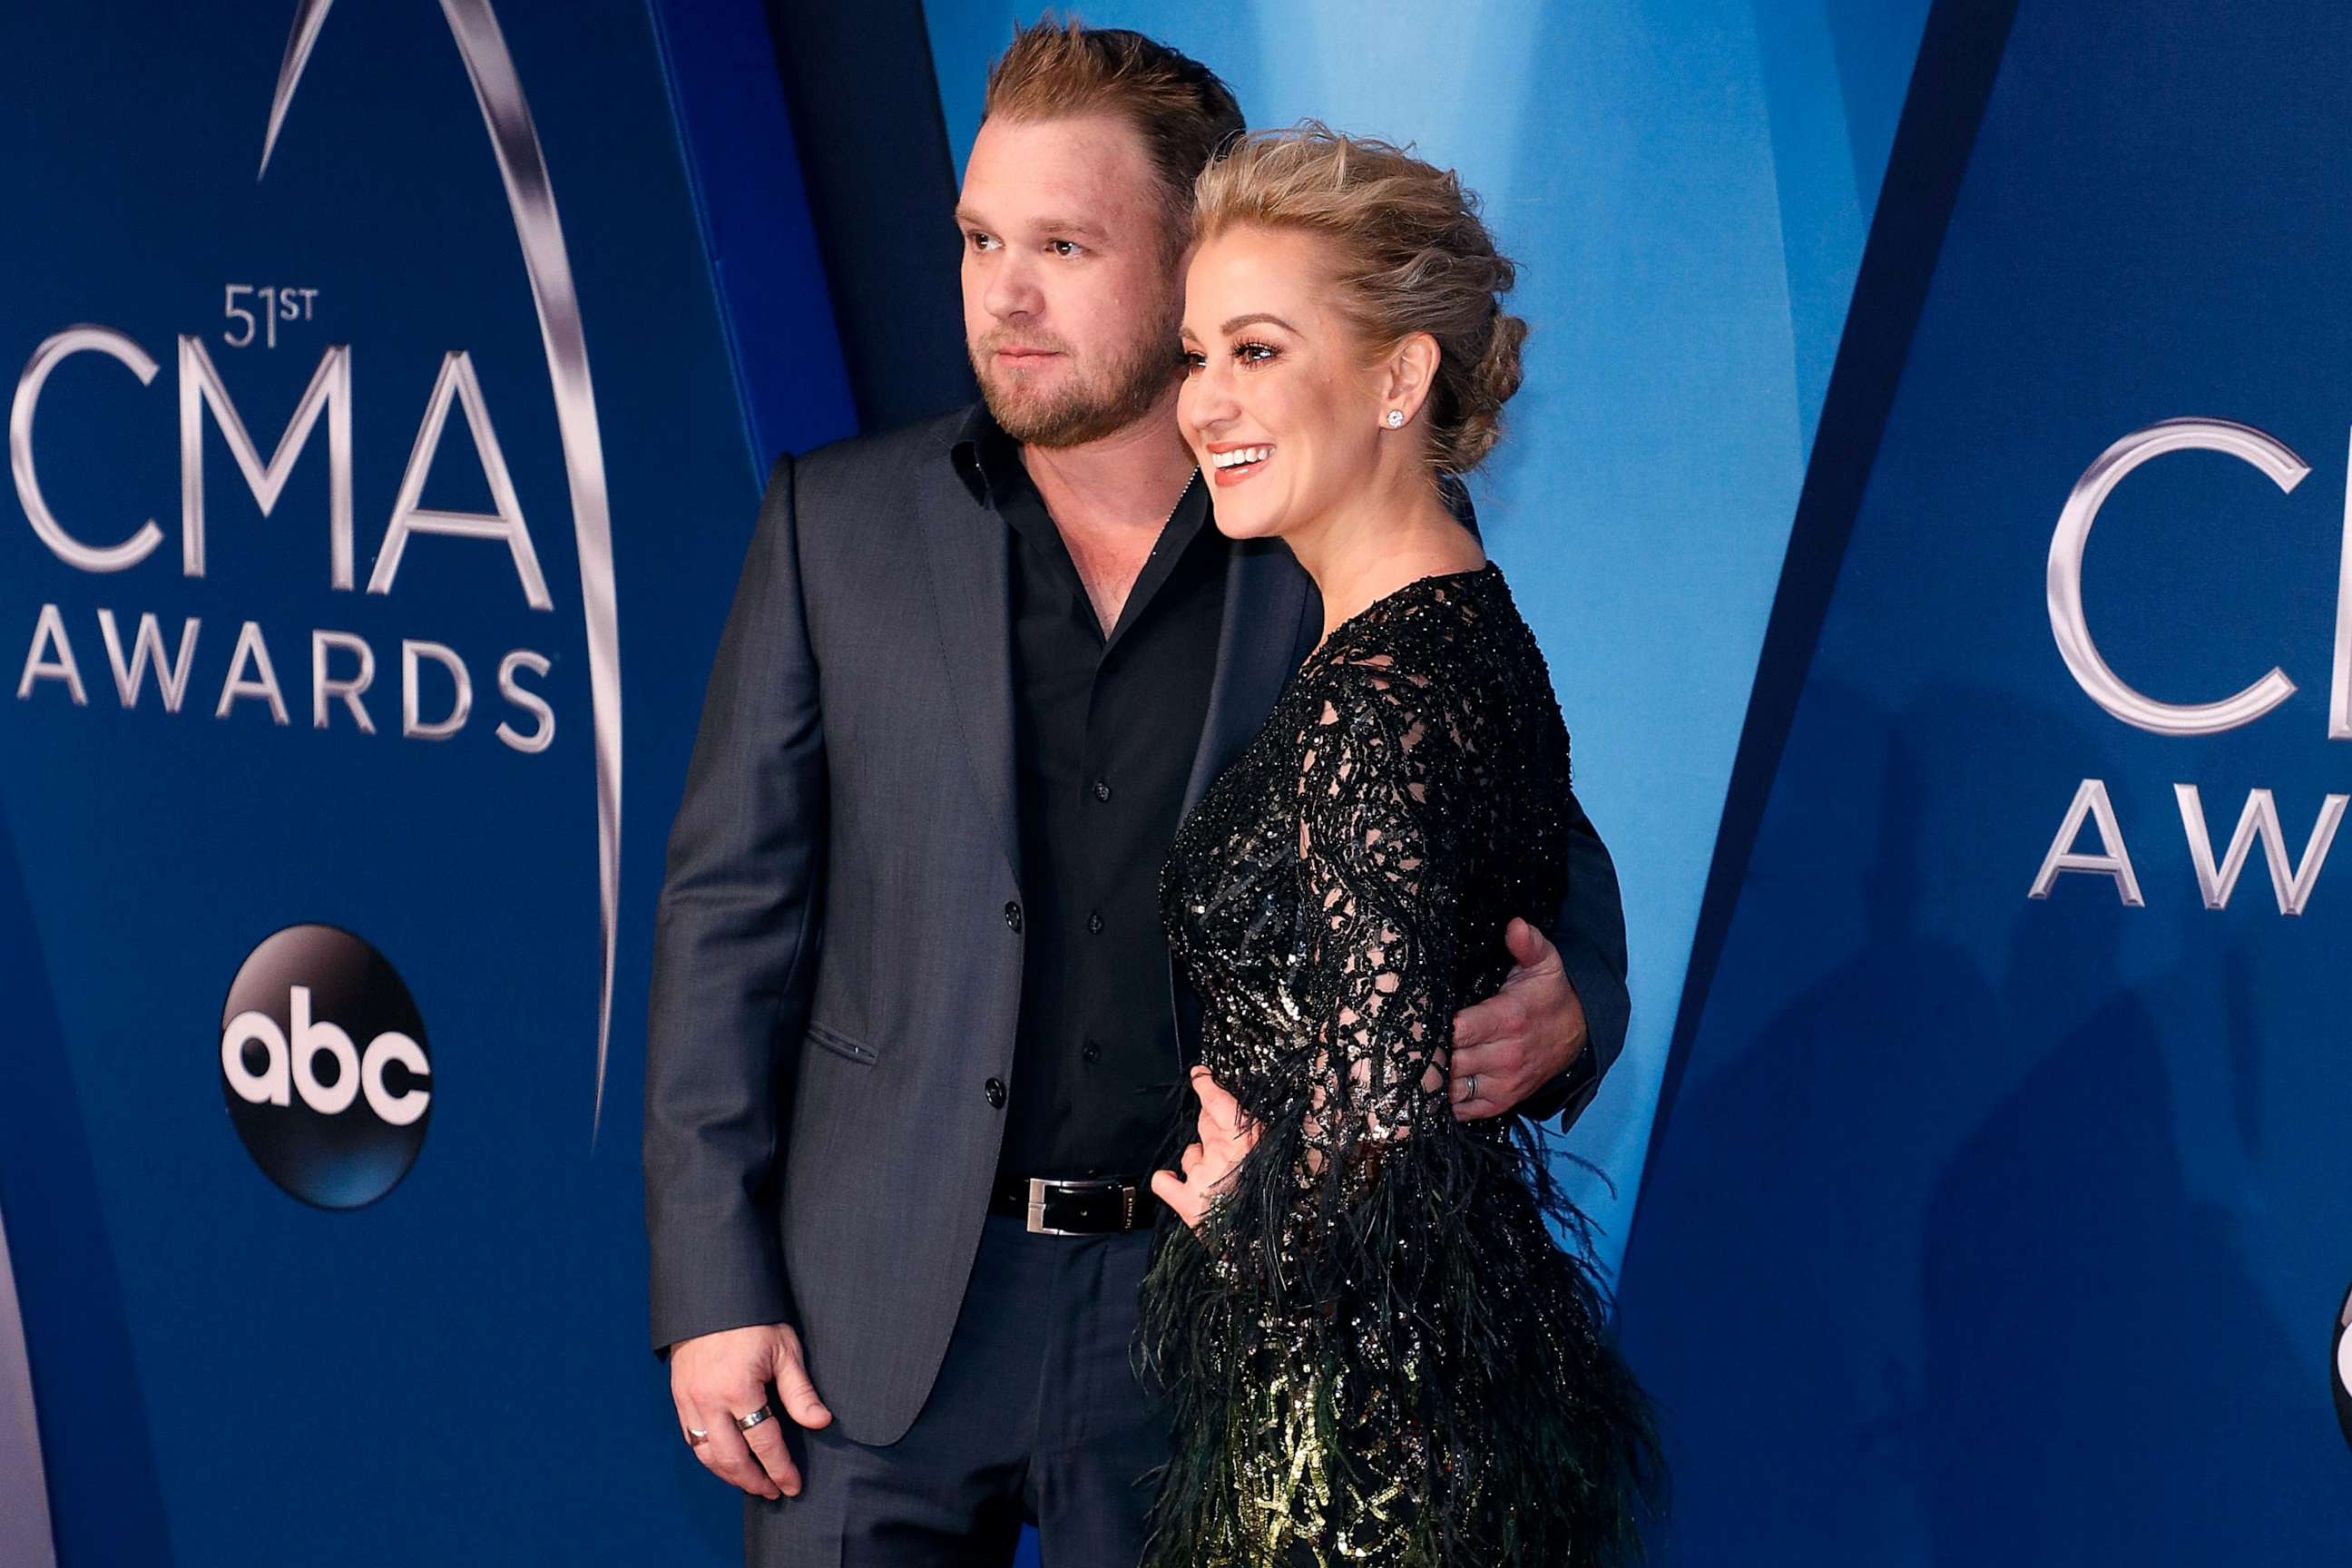 PHOTO: Kyle Jacobs and Kellie Pickler attend the 51st annual CMA Awards at the Bridgestone Arena on November 8, 2017 in Nashville, Tennessee.